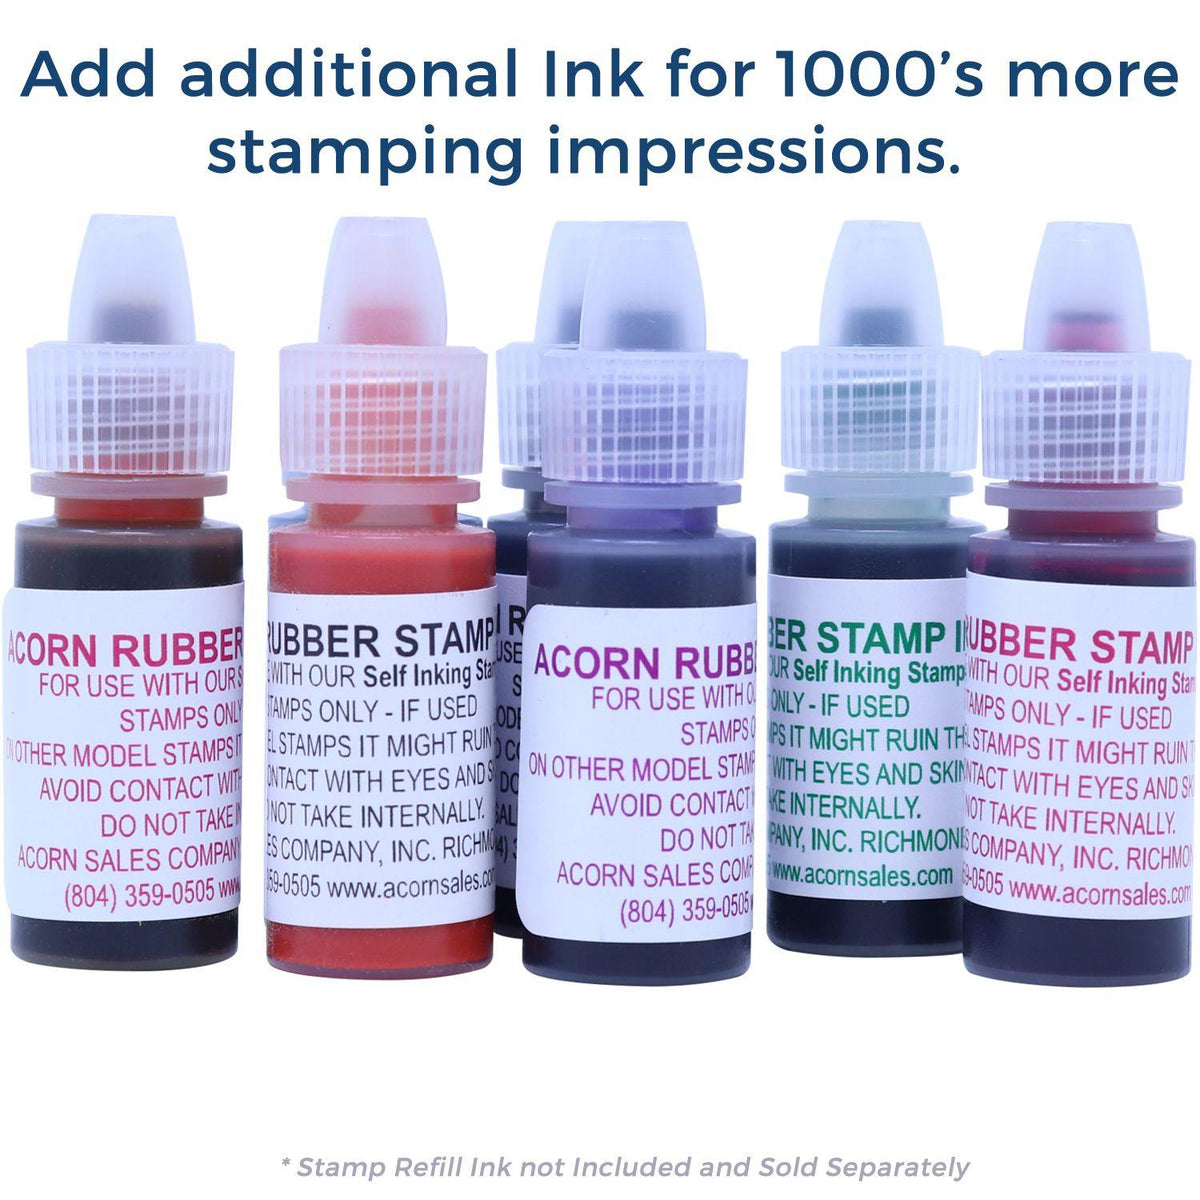 Refill Inks for Large Pre-Inked Bravo with Hands Stamp Available